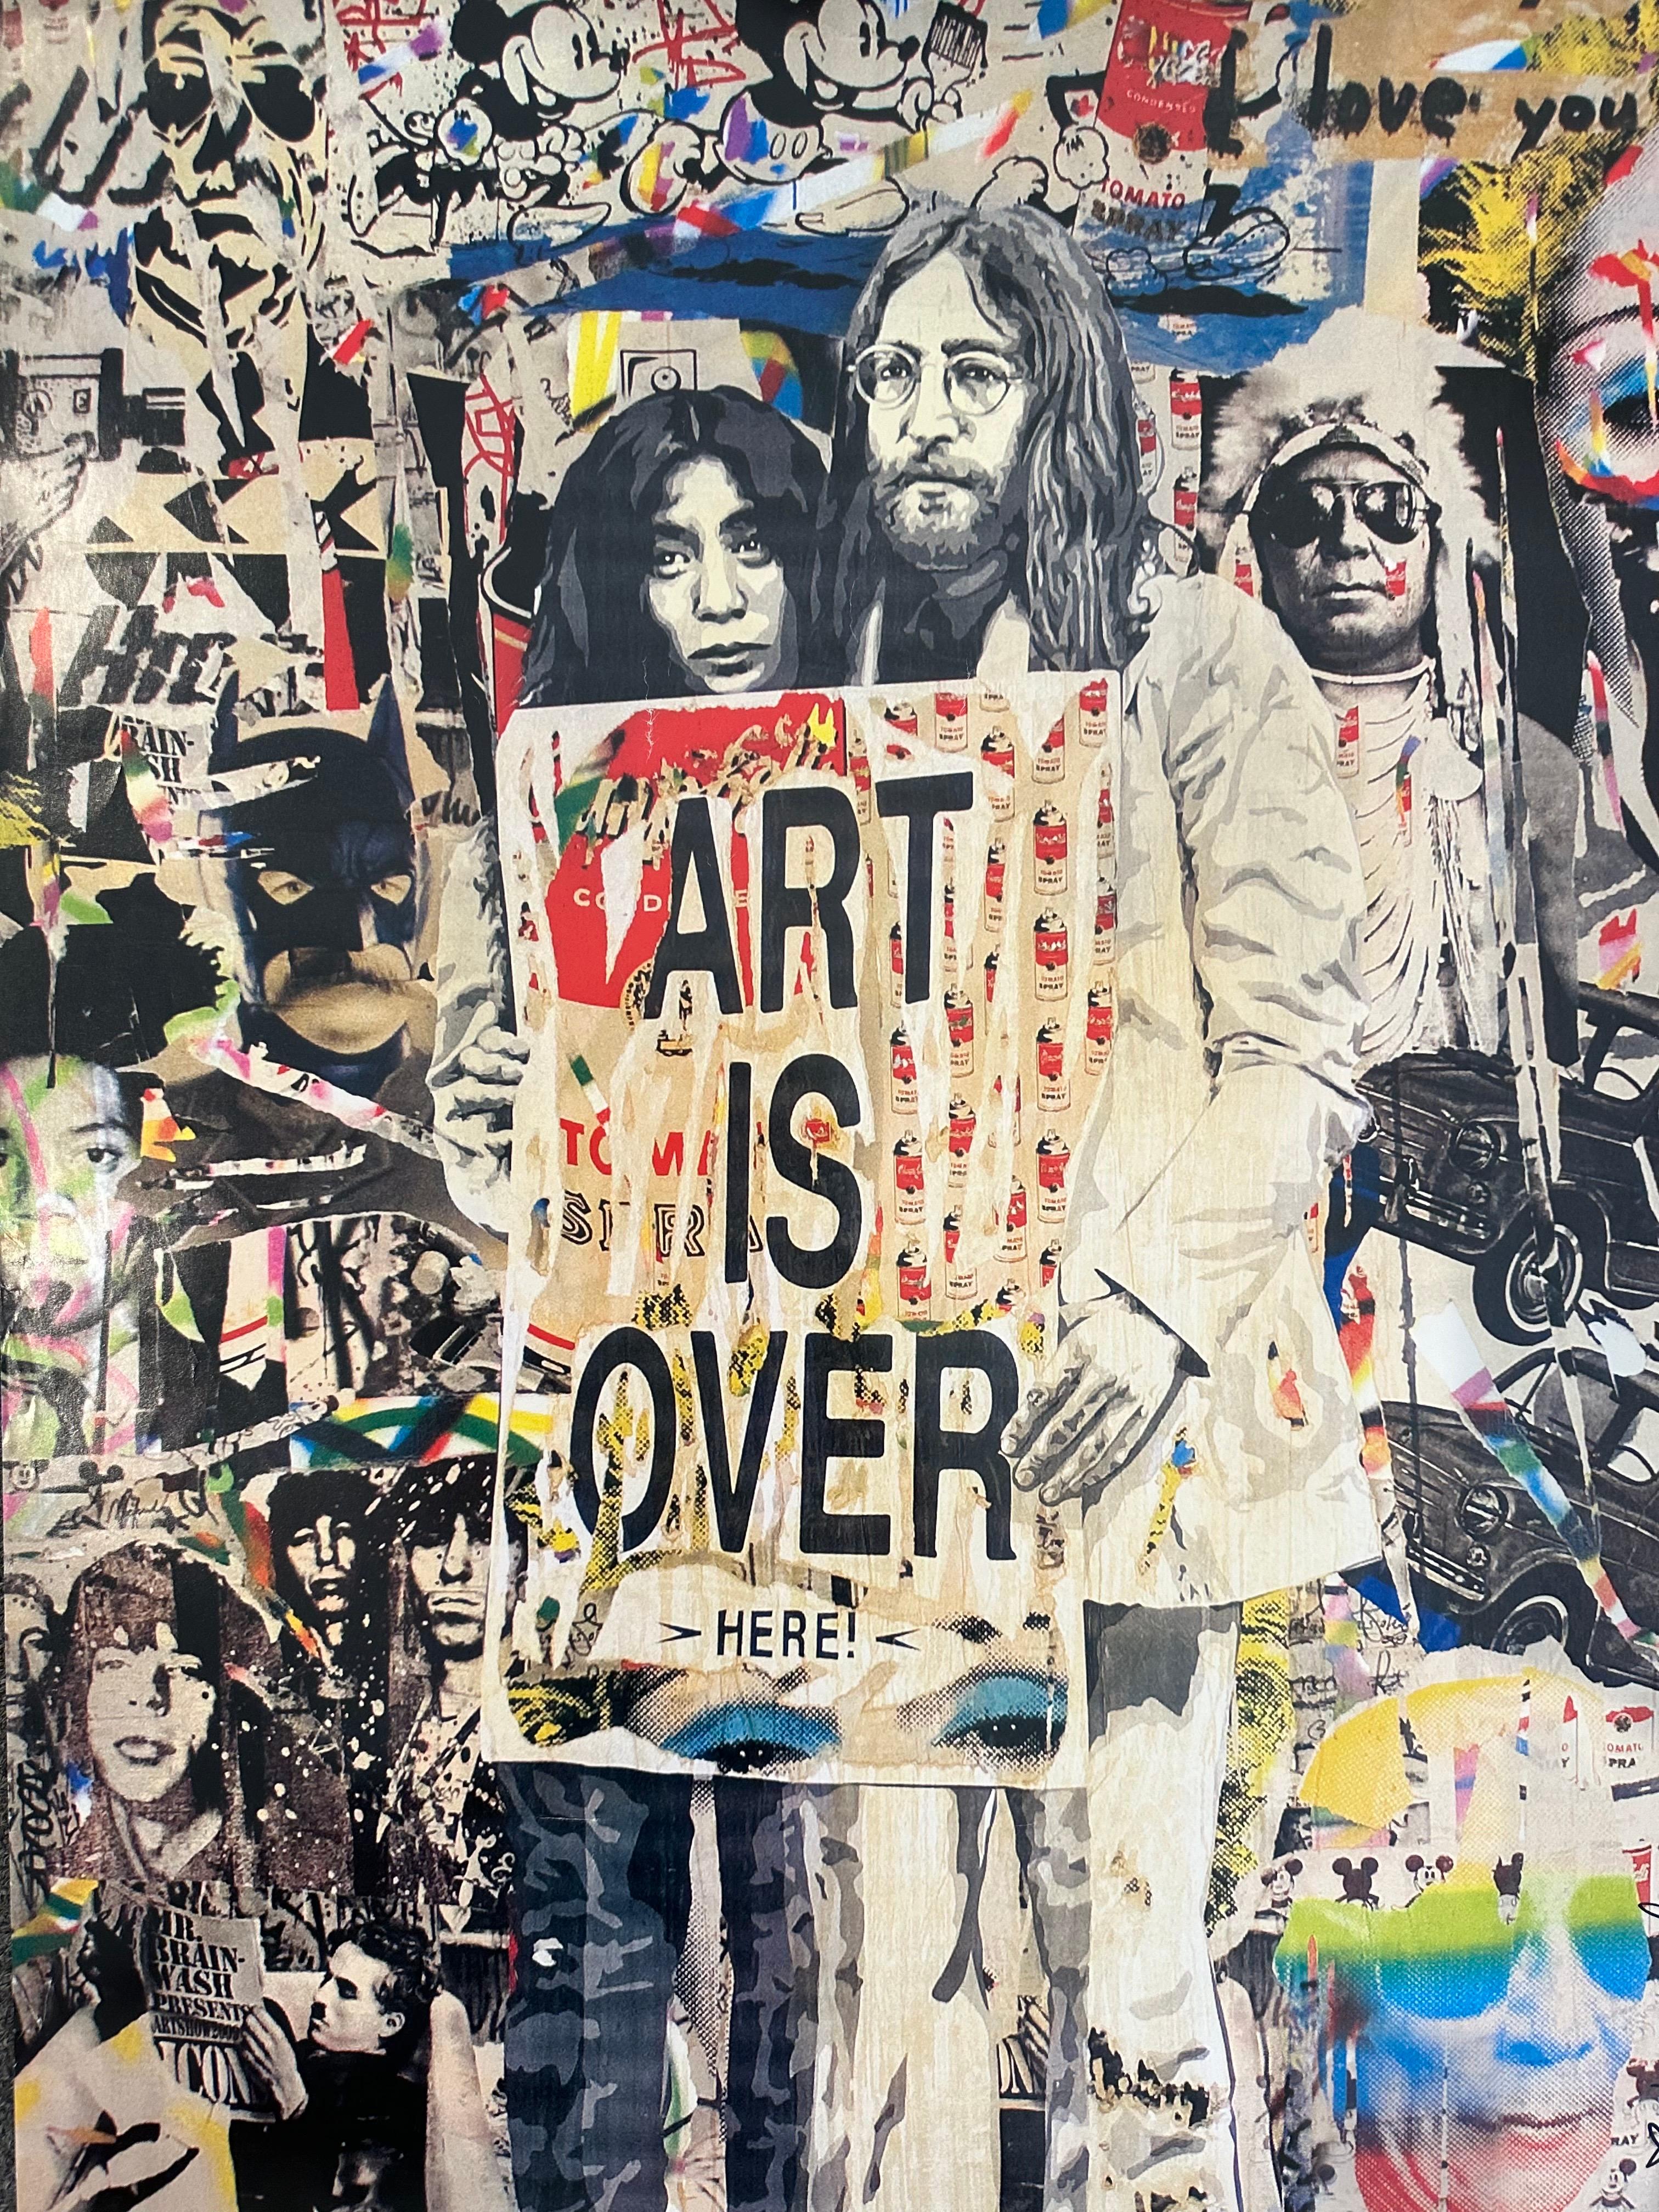 Contemporary John Lennon & Yoko Ono Art Poster from the ICONS Exhibit by Mr. Brainwash For Sale